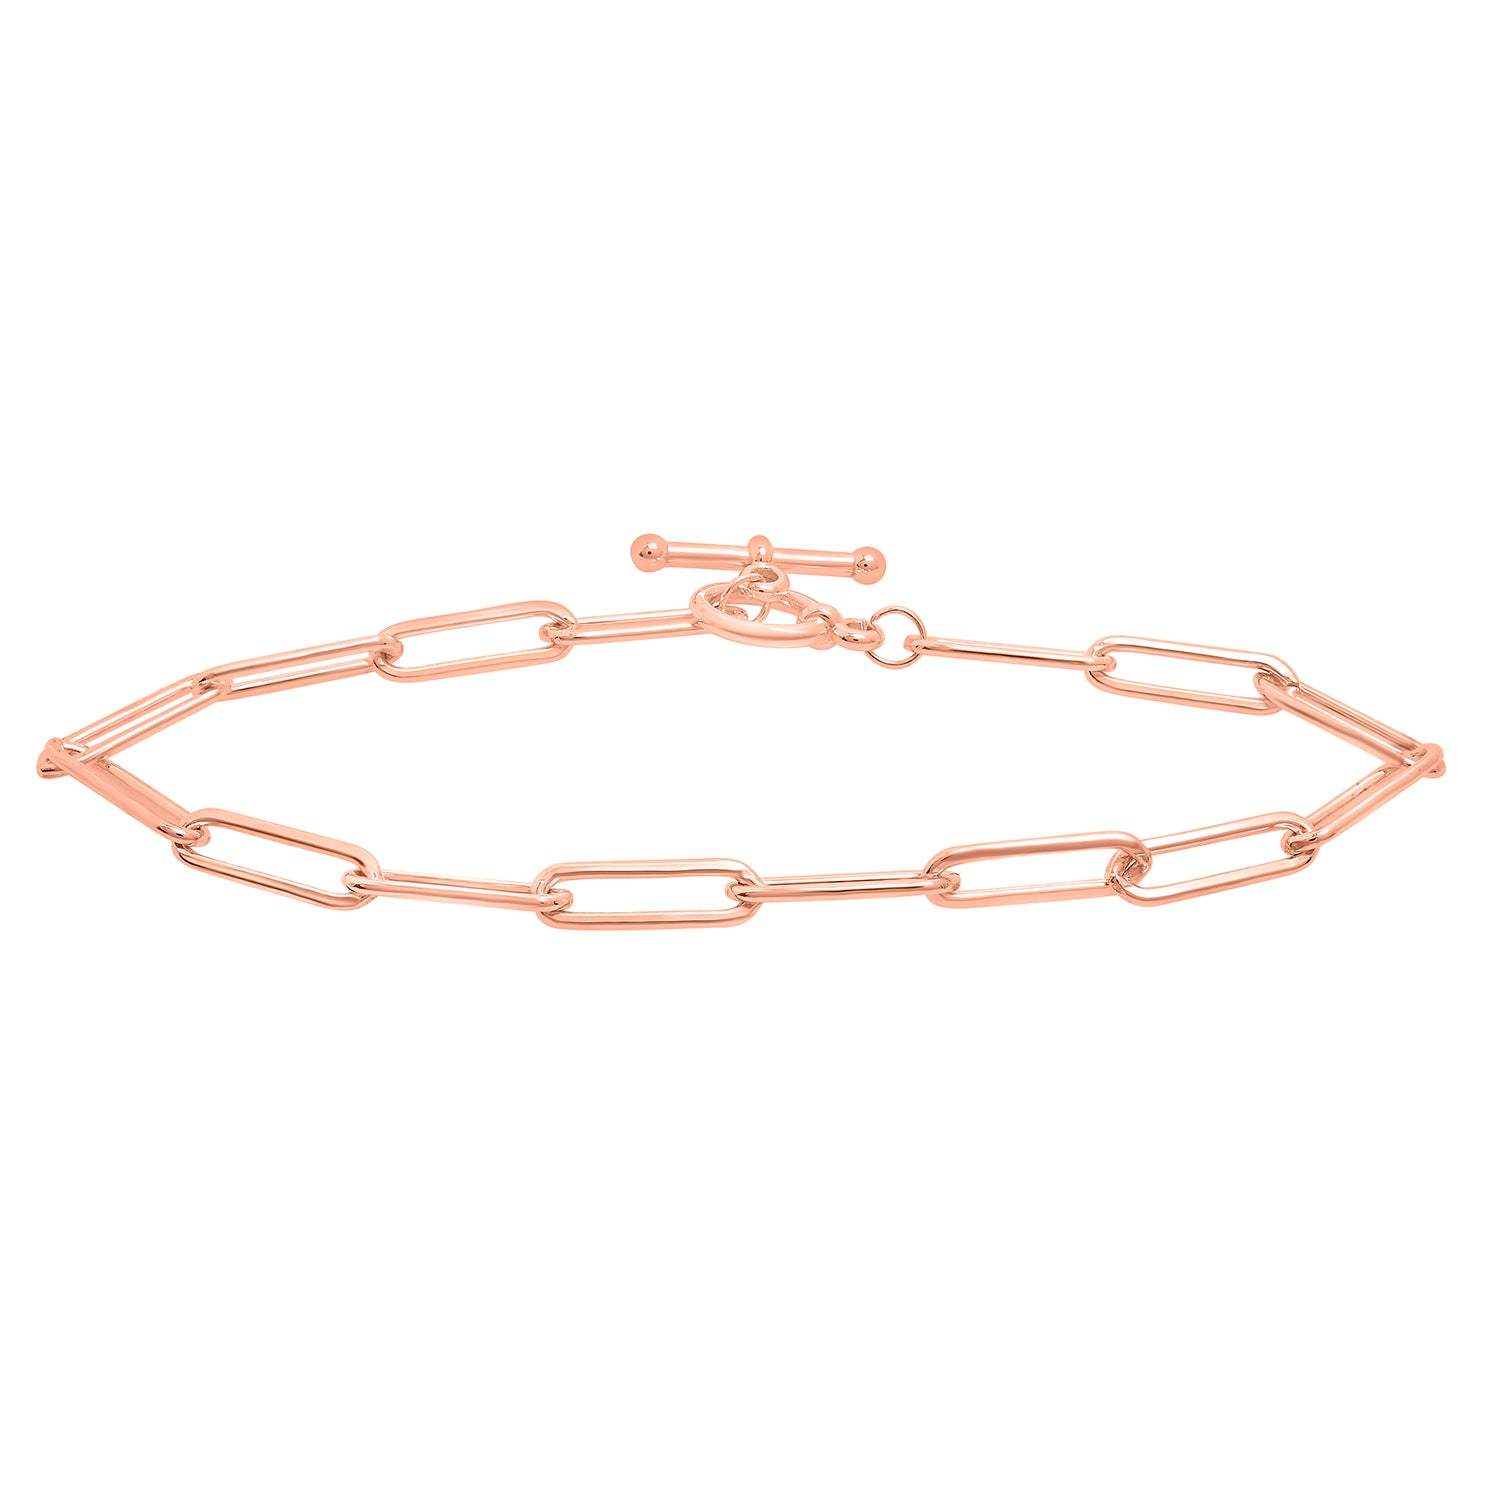 Paperclip Chain Bracelet with Toggle Closure in Rose Gold 